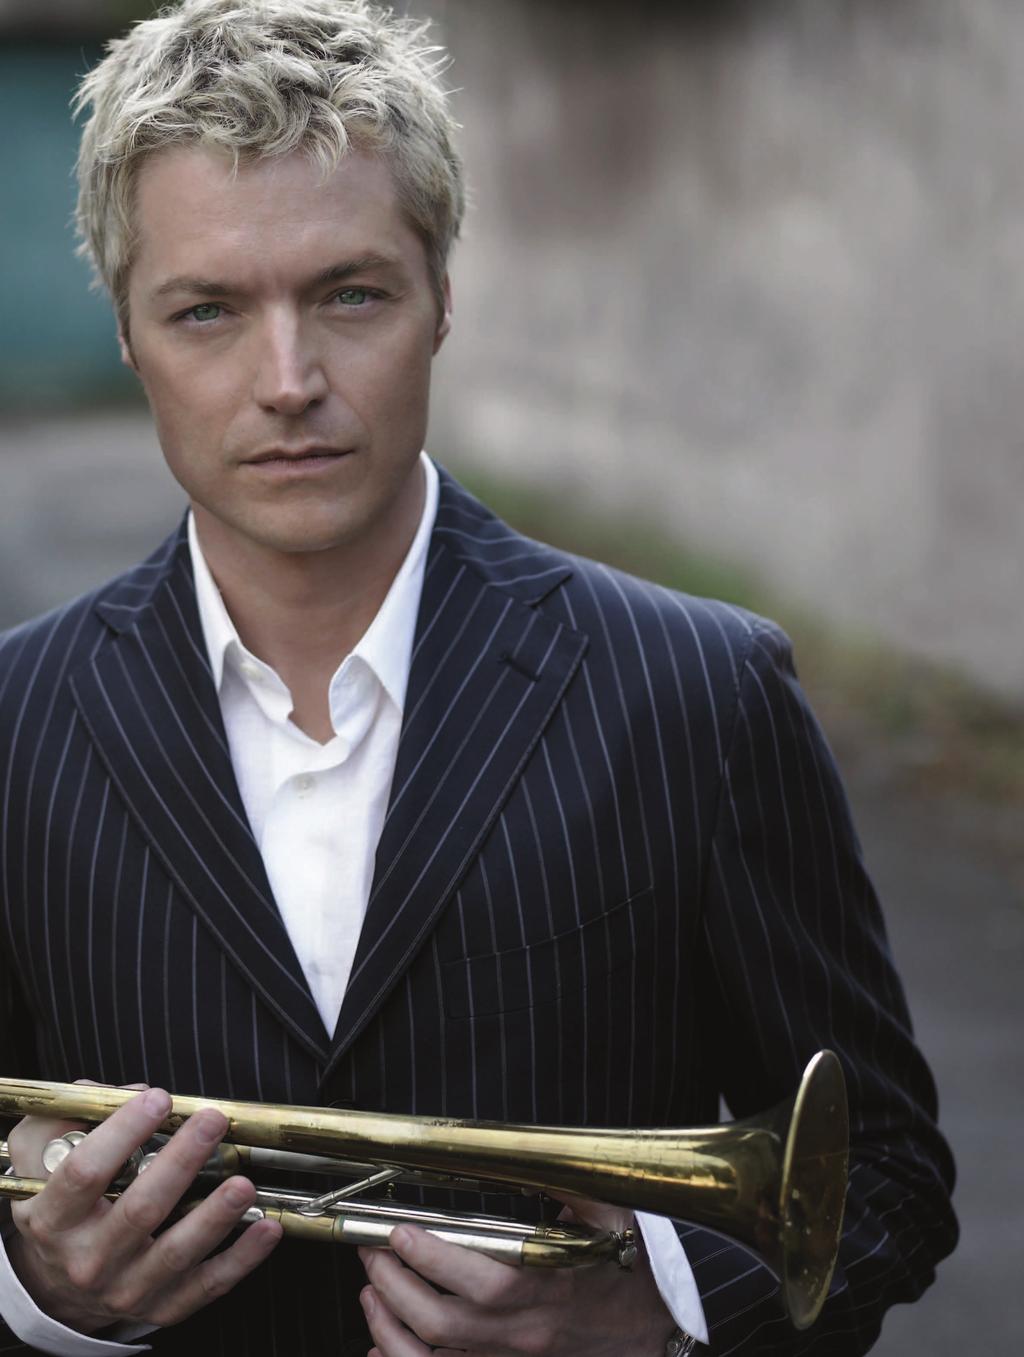 ABSOLUTE OPUS An Evening With Chris Botti Concert The Family Estate returns with captivating live music events throughout the summer.